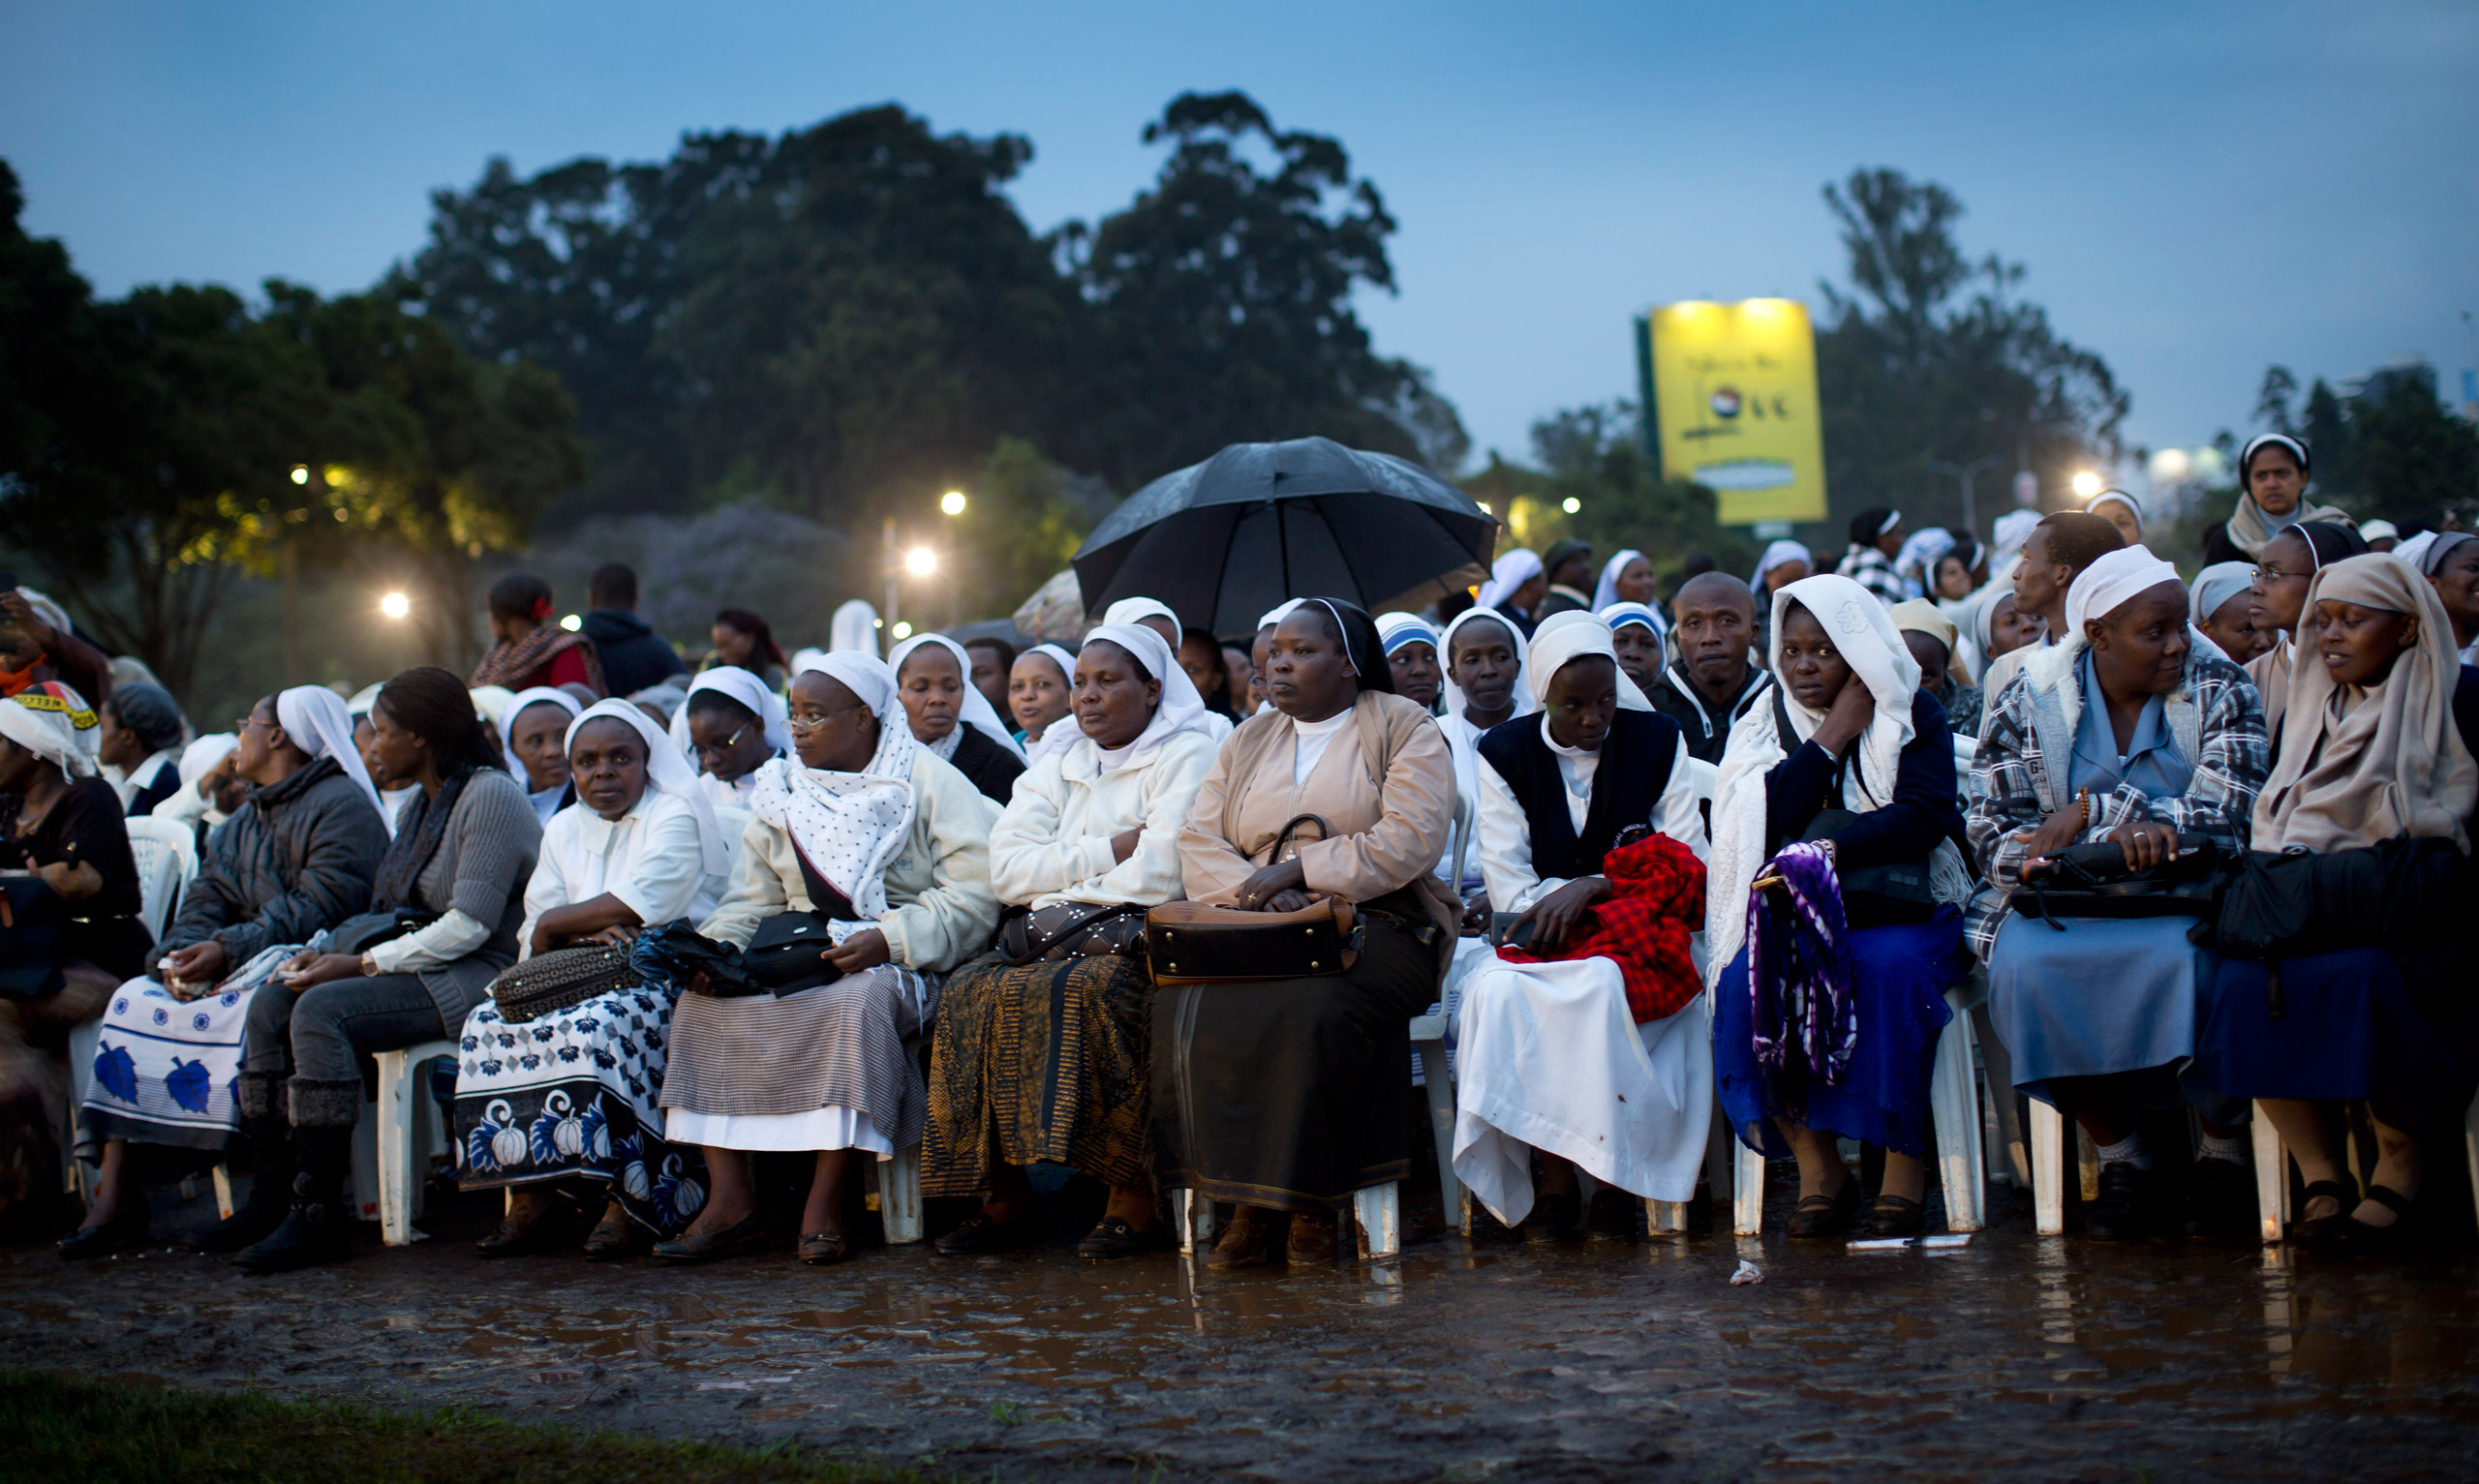 Catholic sisters wait just after dawn in the rain and mud to attend a mass to be given by Pope Francis at the campus of the University of Nairobi on Nov. 26, 2015.